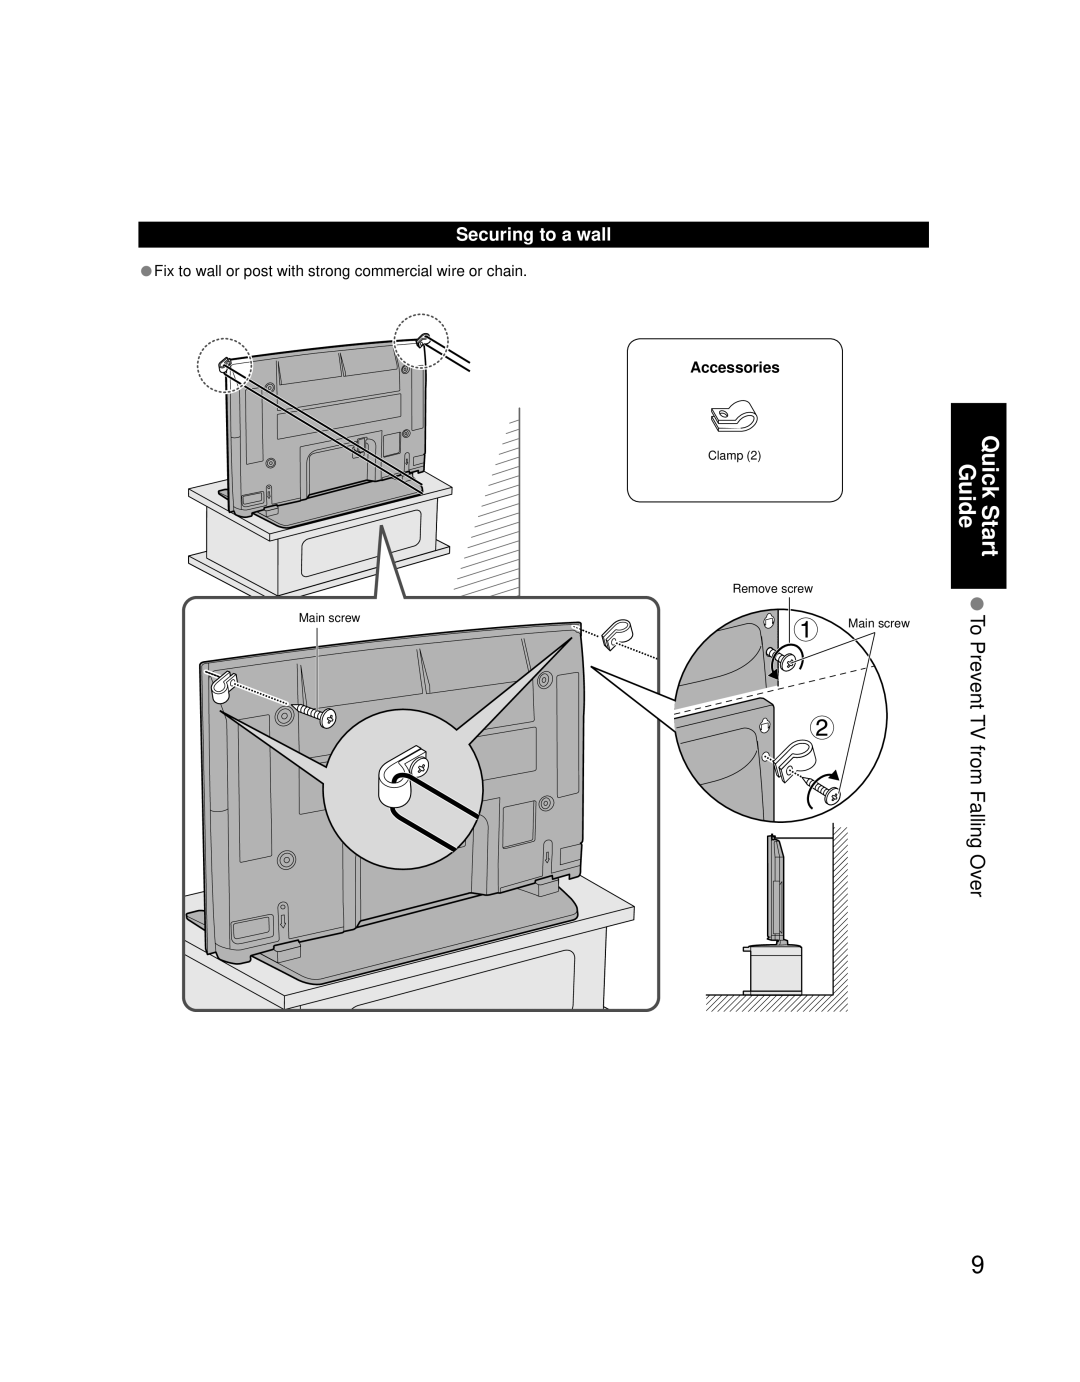 Panasonic TQB2AA0756 Guide To Prevent TV from Falling Over, Securing to a wall, Accessories, Main screw, Quick Start 